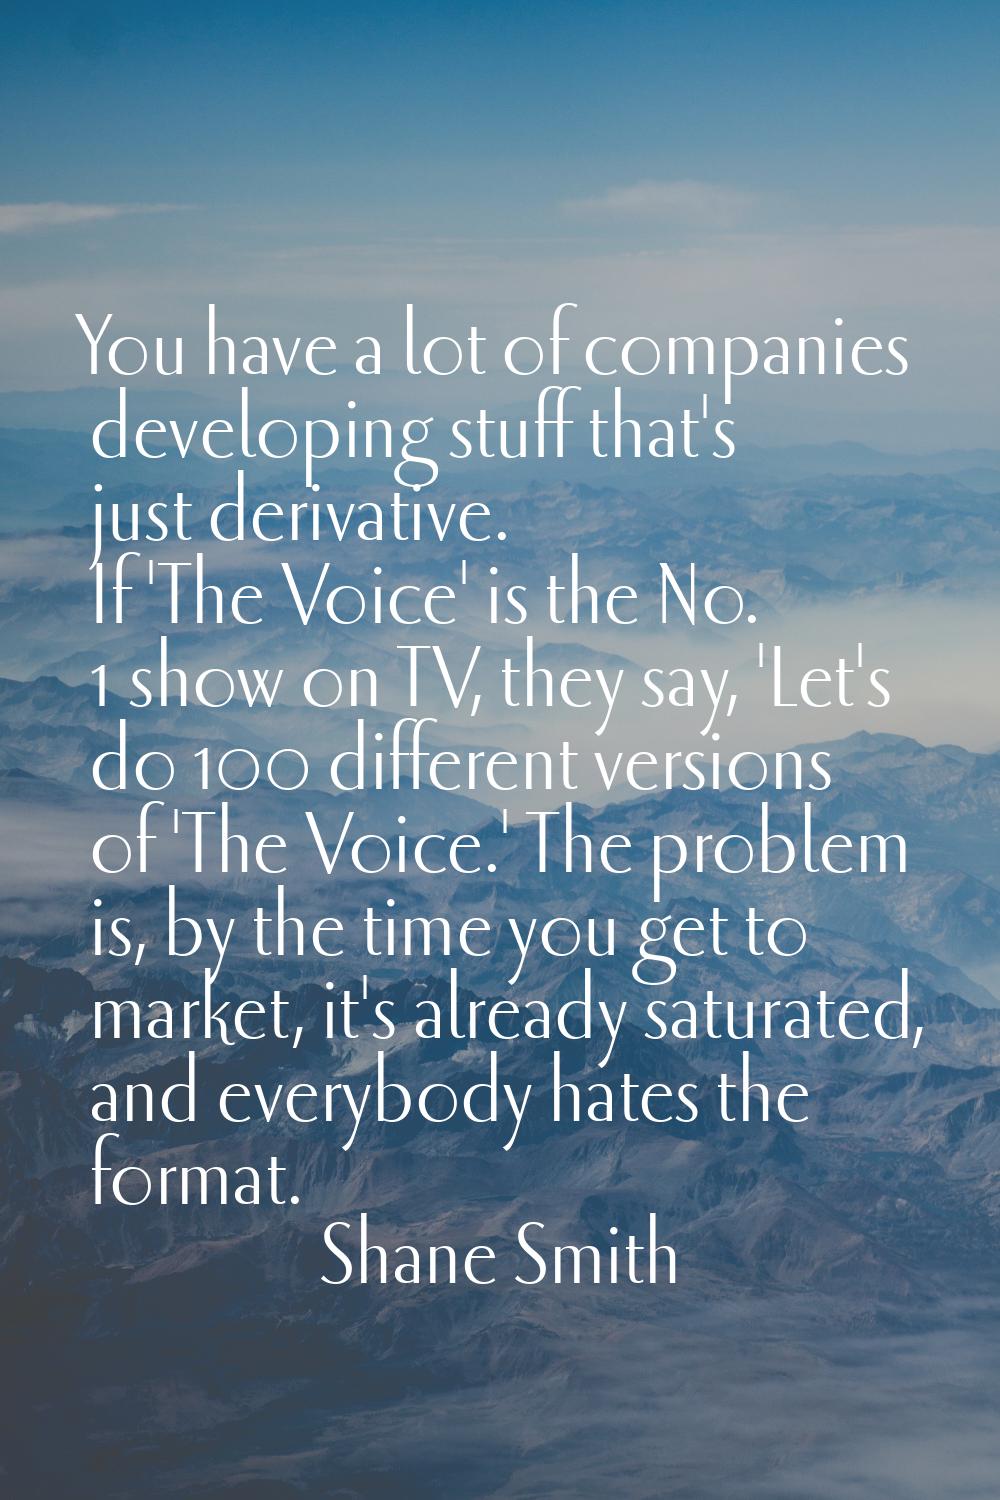 You have a lot of companies developing stuff that's just derivative. If 'The Voice' is the No. 1 sh